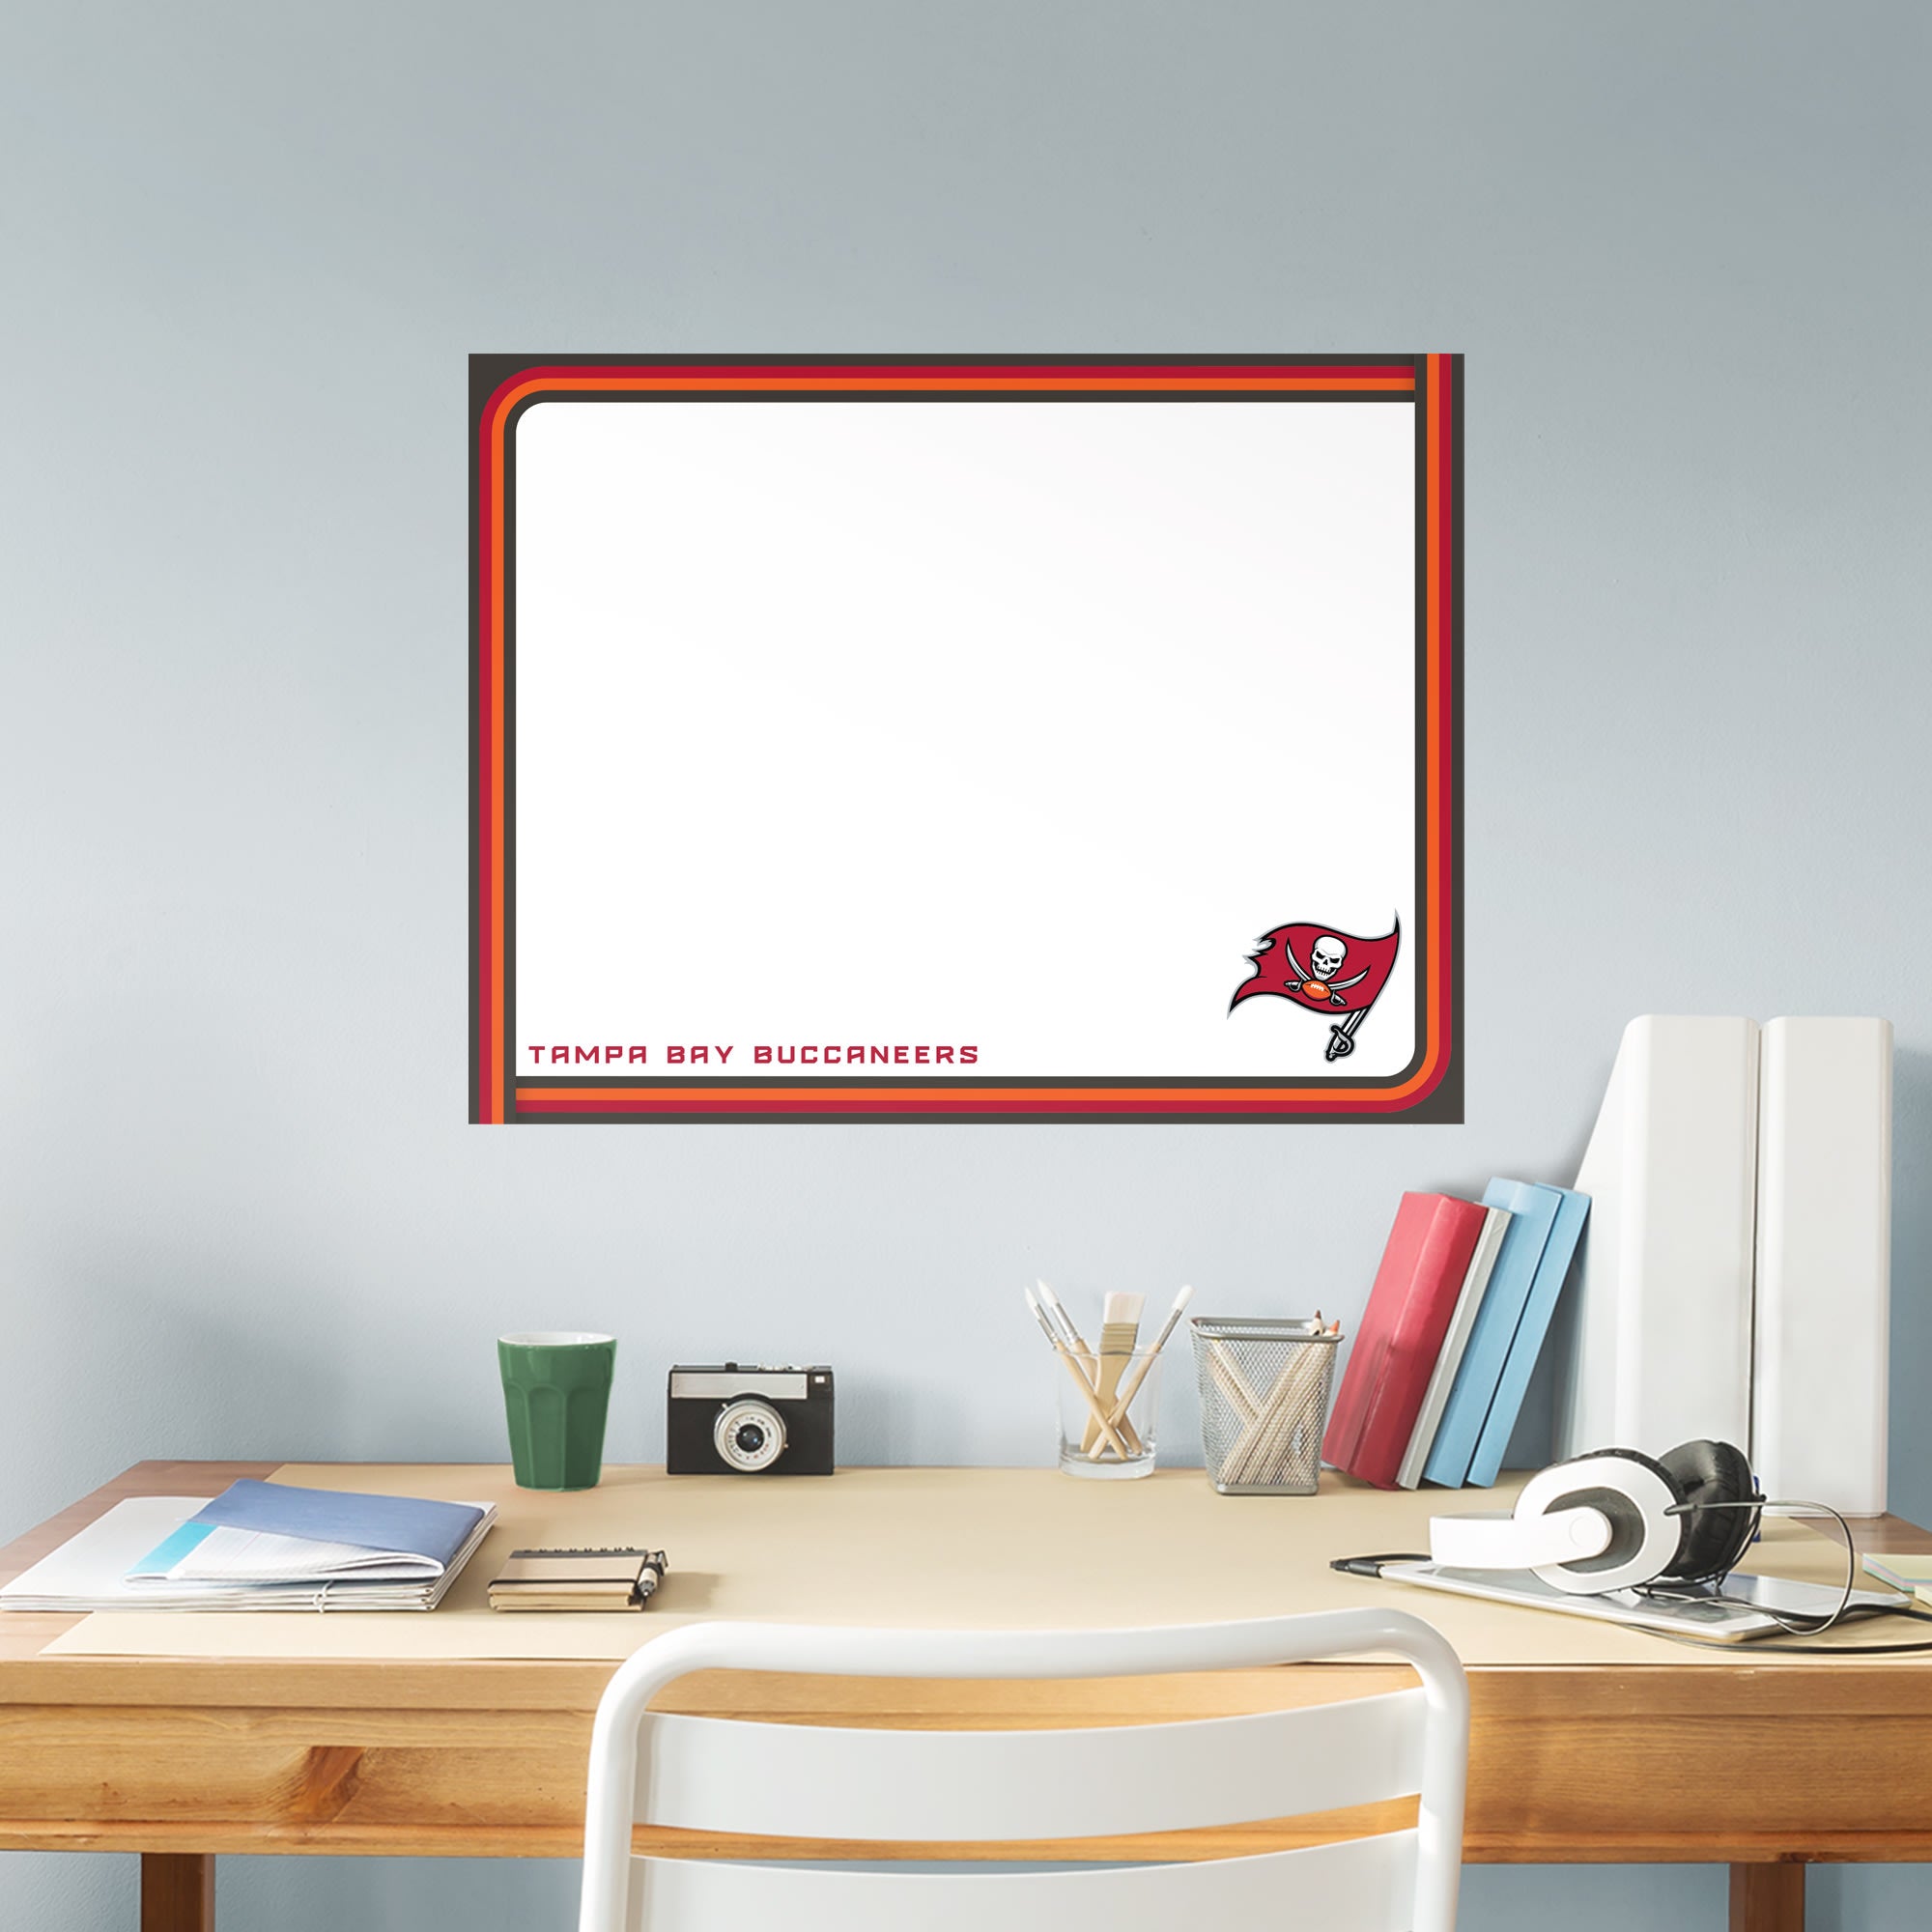 Tampa Bay Buccaneers: Dry Erase Whiteboard - Officially Licensed NFL Removable Wall Decal XL by Fathead | Vinyl